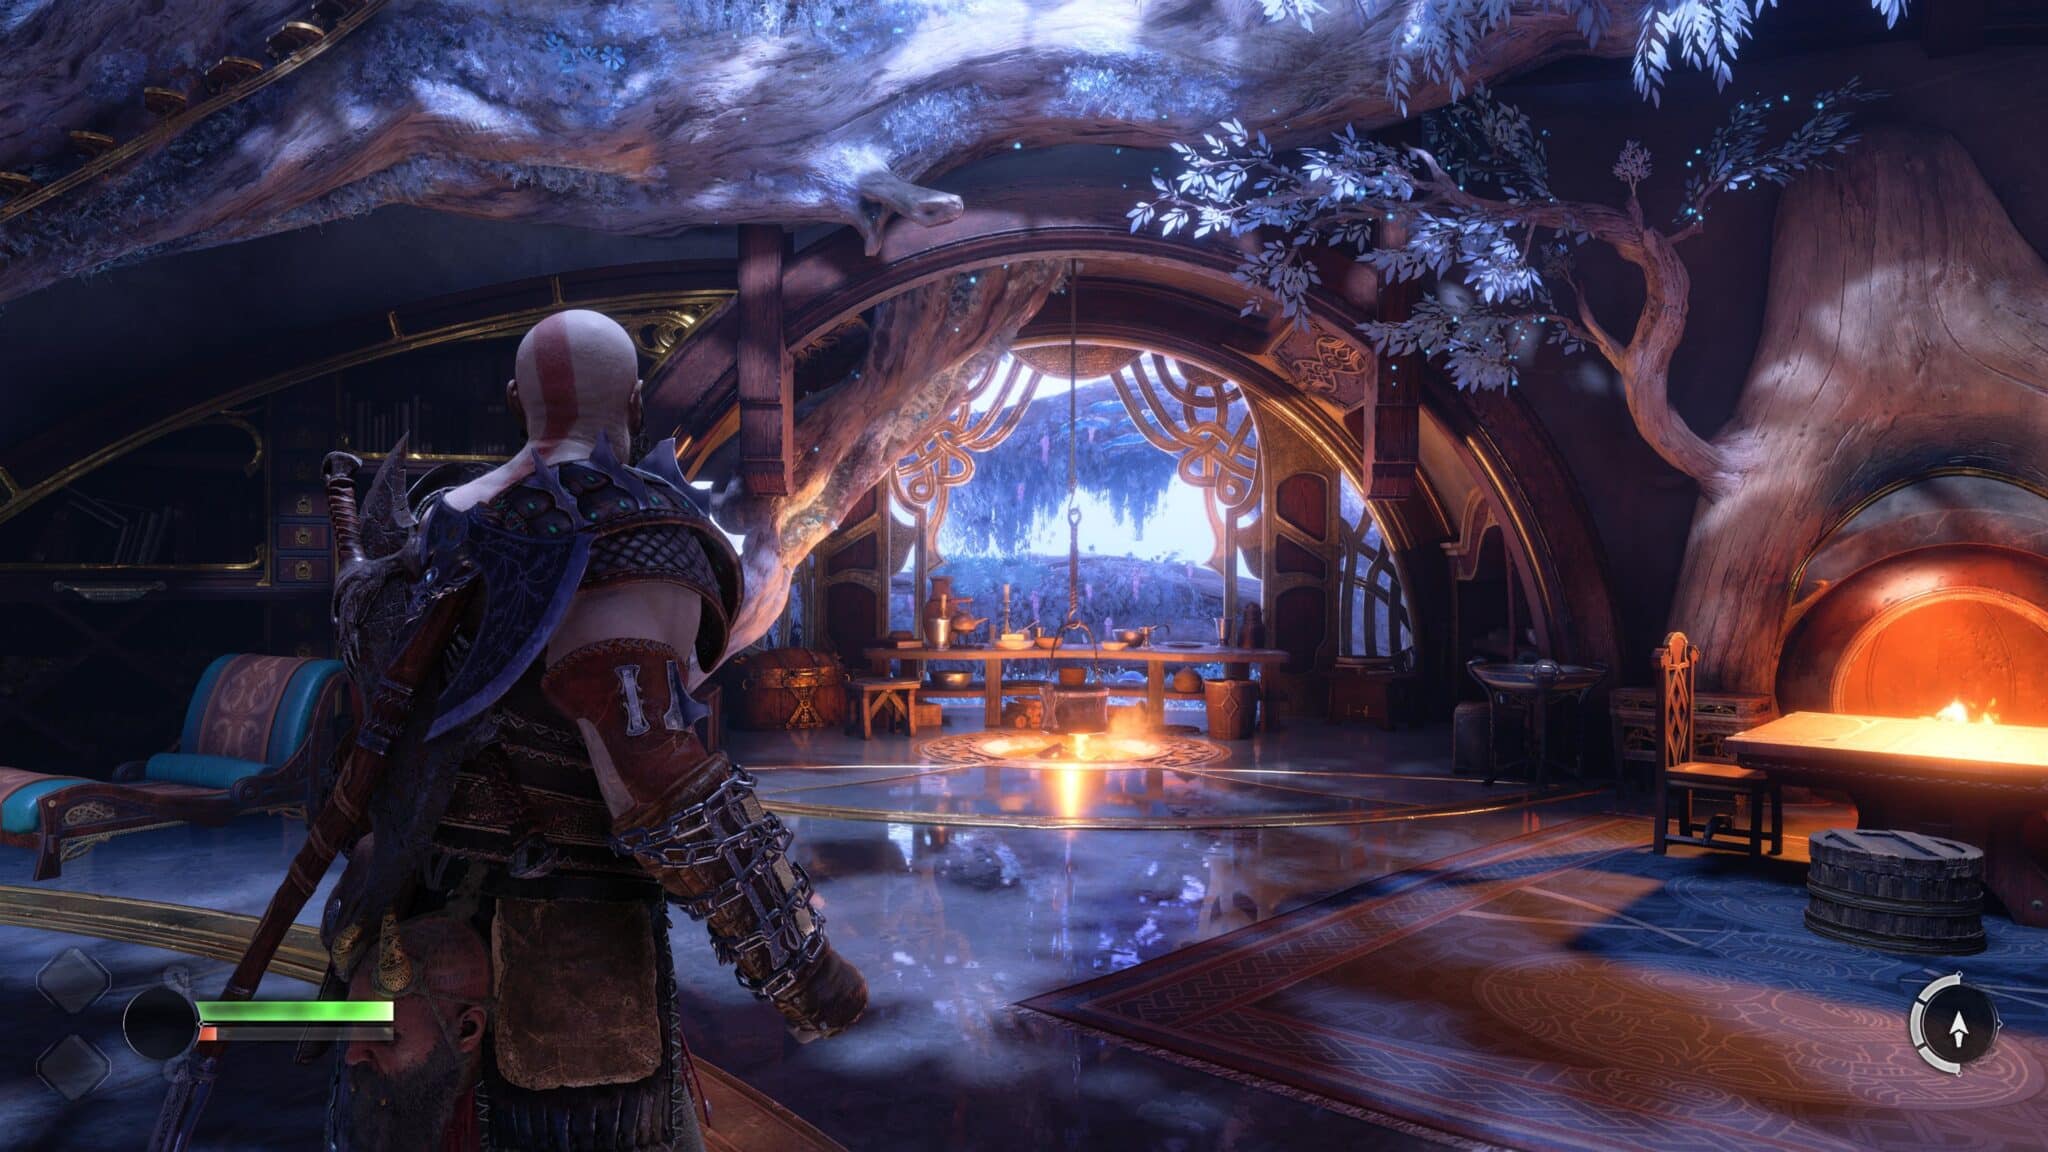 (In between their adventures, Kratos and Atreus regularly take shelter in the house of their dwarf friends.)